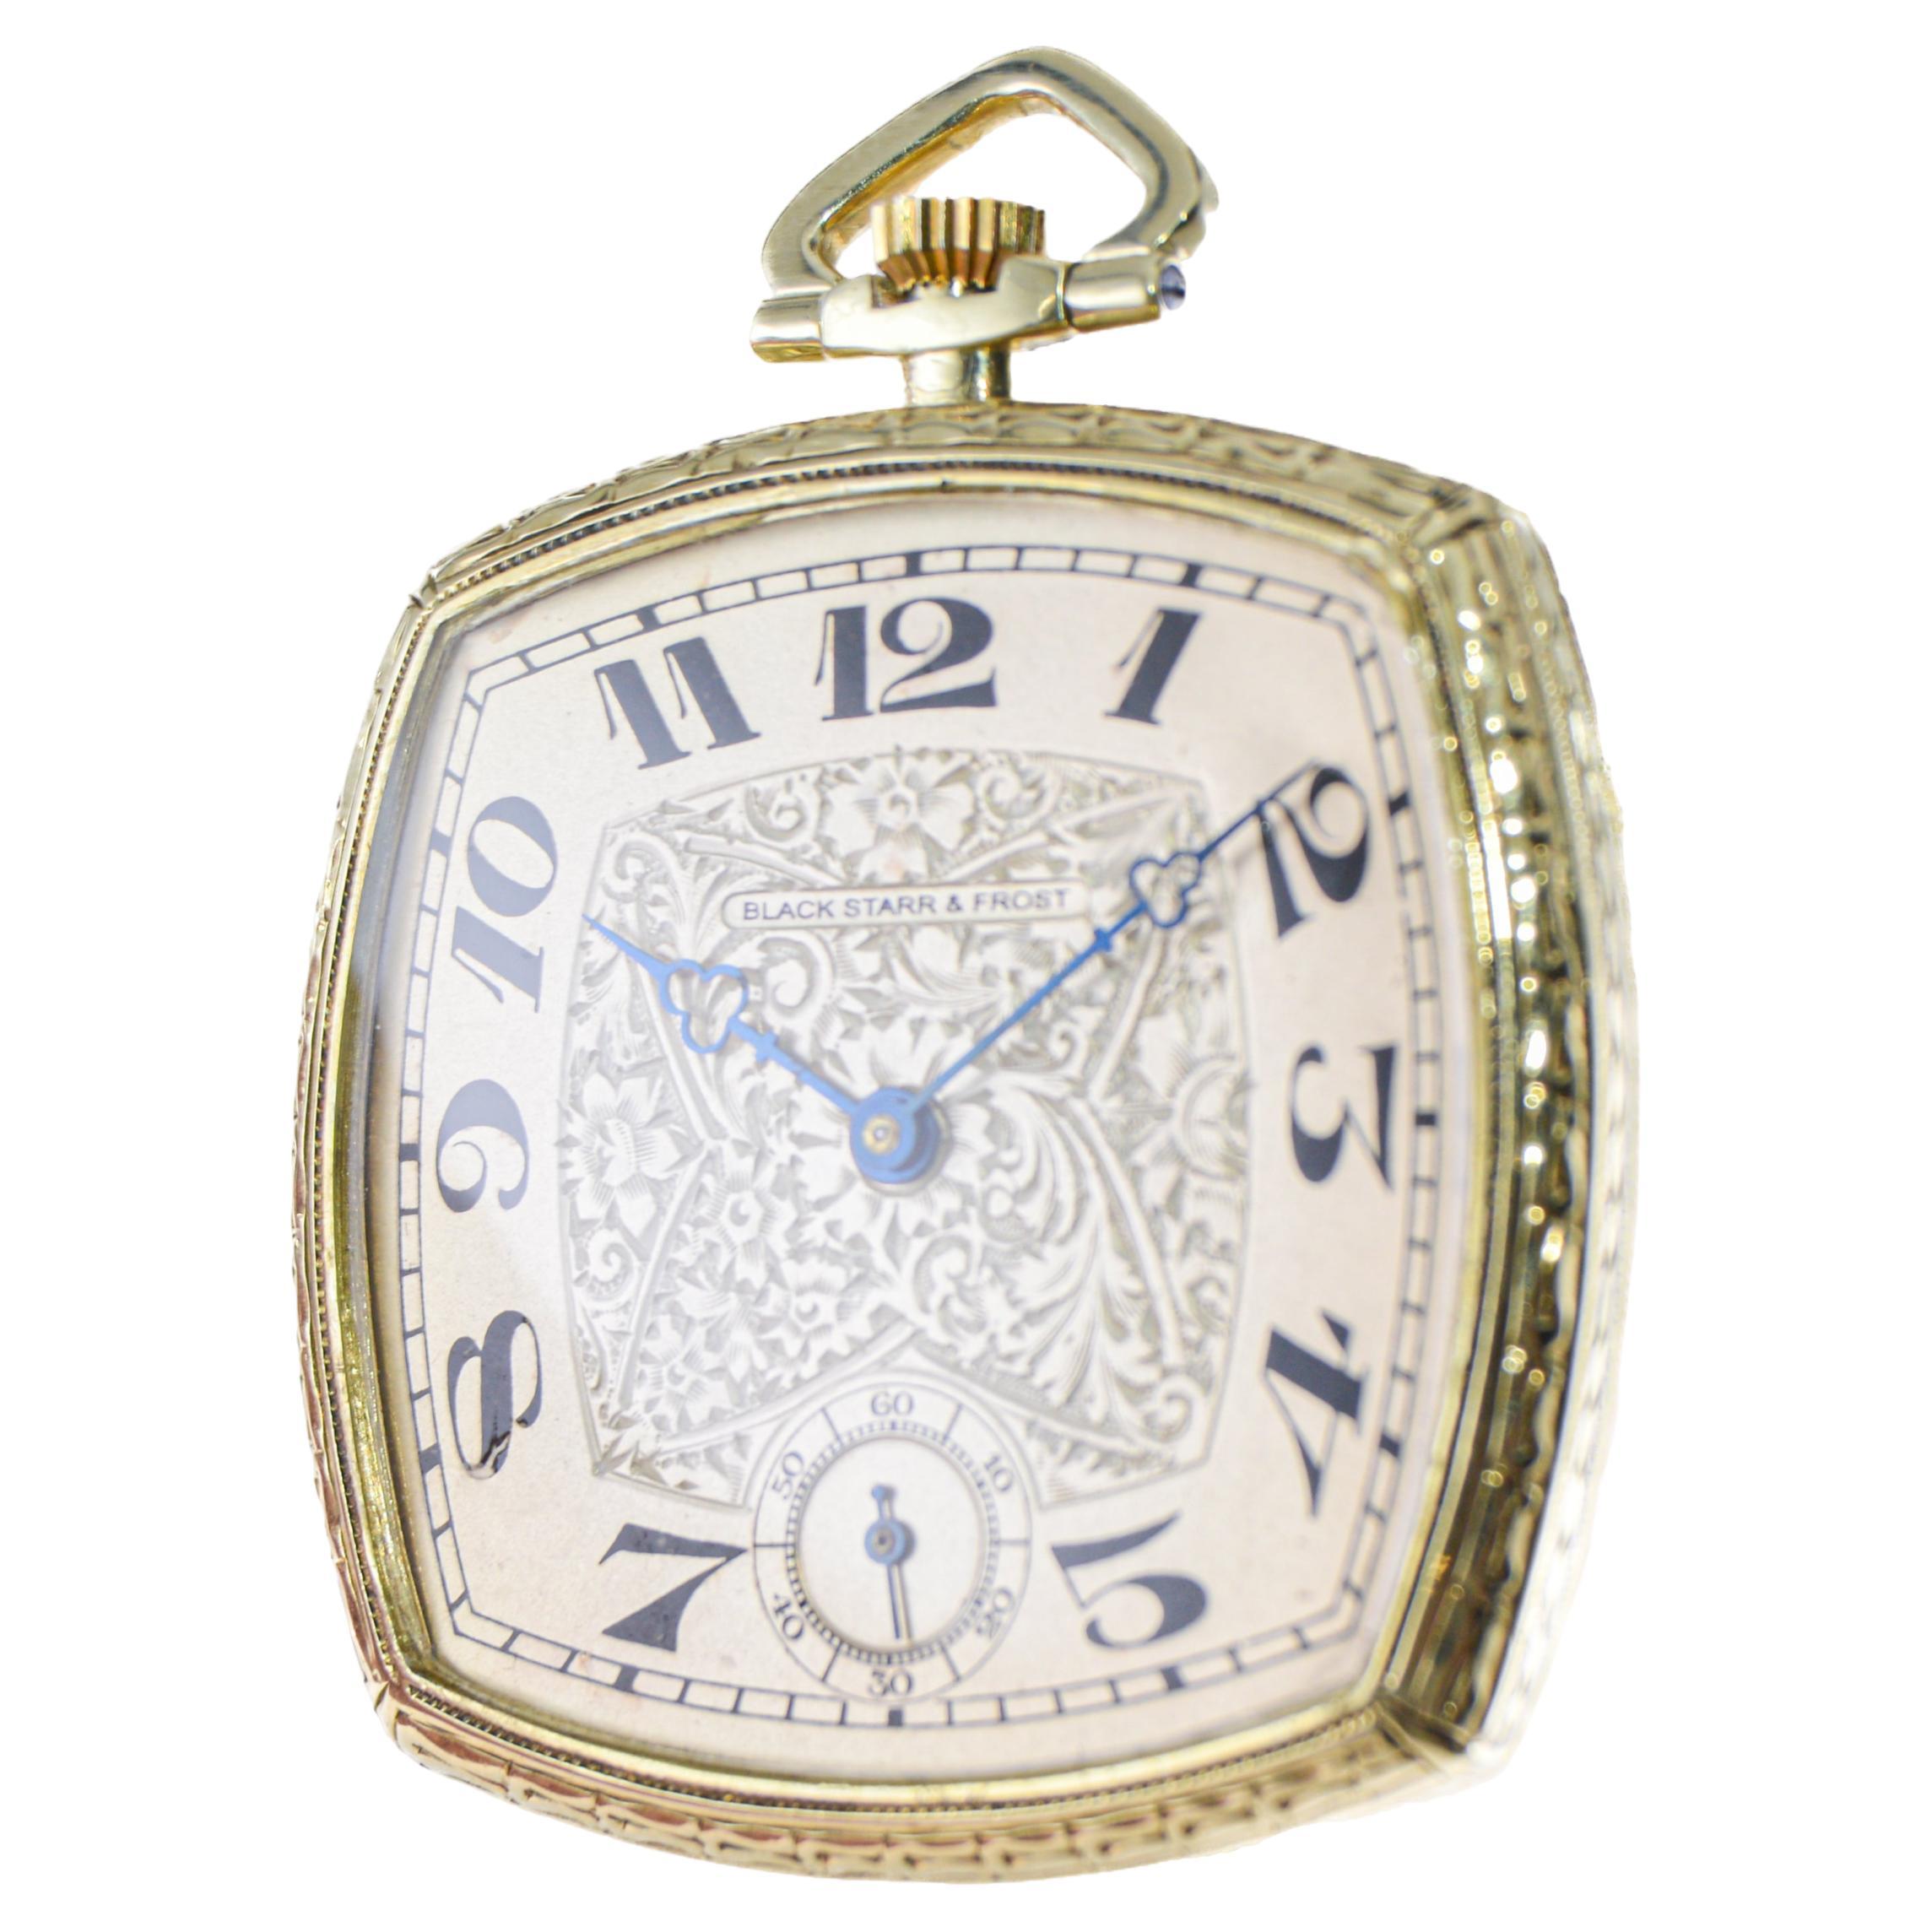 Black Starr & Frost 14 Karat Gold Art Deco Pocket Watch with Engraved Dial  For Sale 2